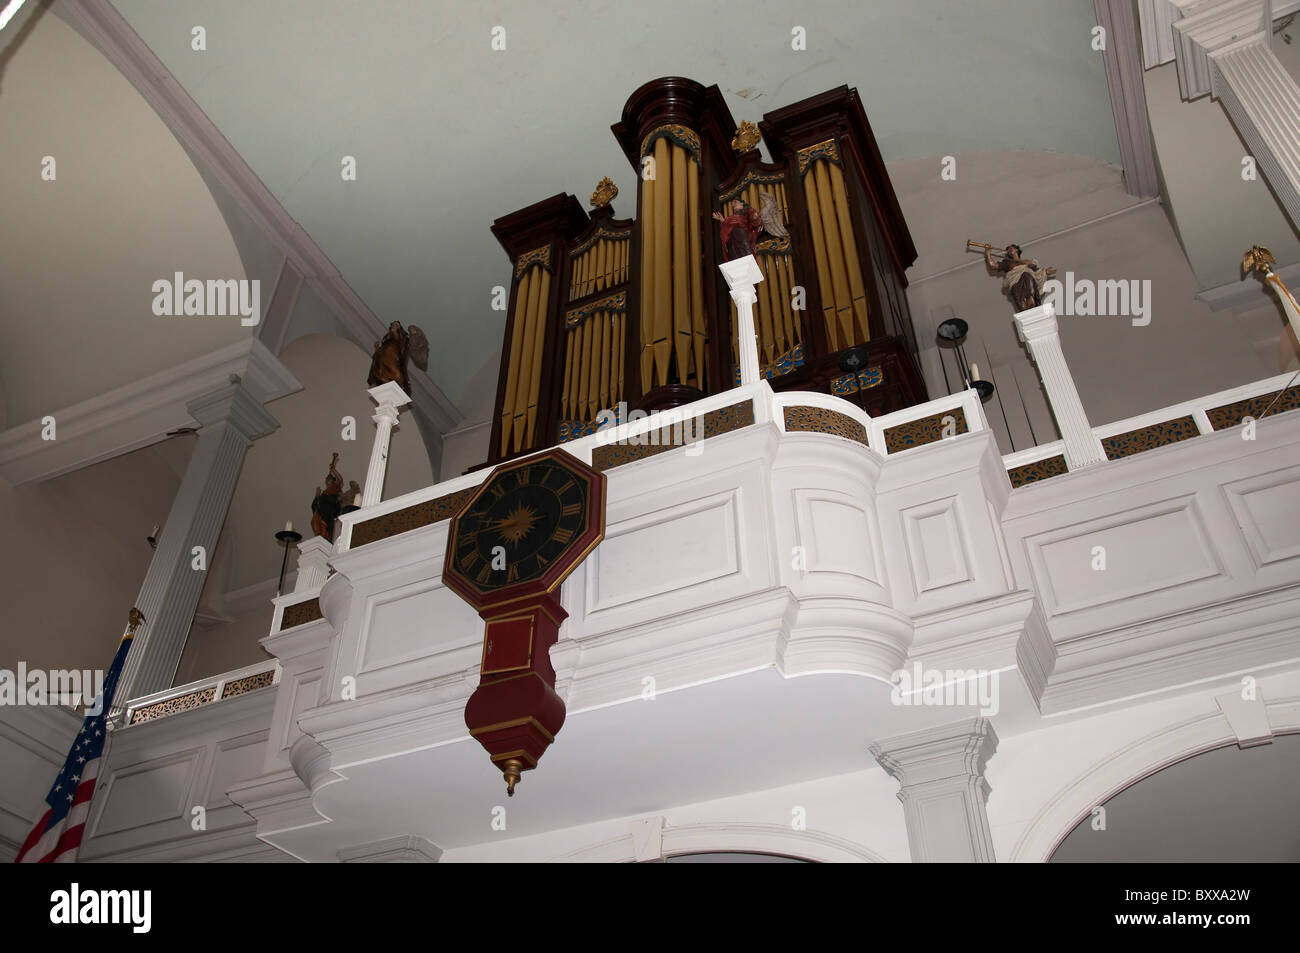 Church organ in the old North Church in the City of Boston, capital of Massachusetts in New England USA Stock Photo